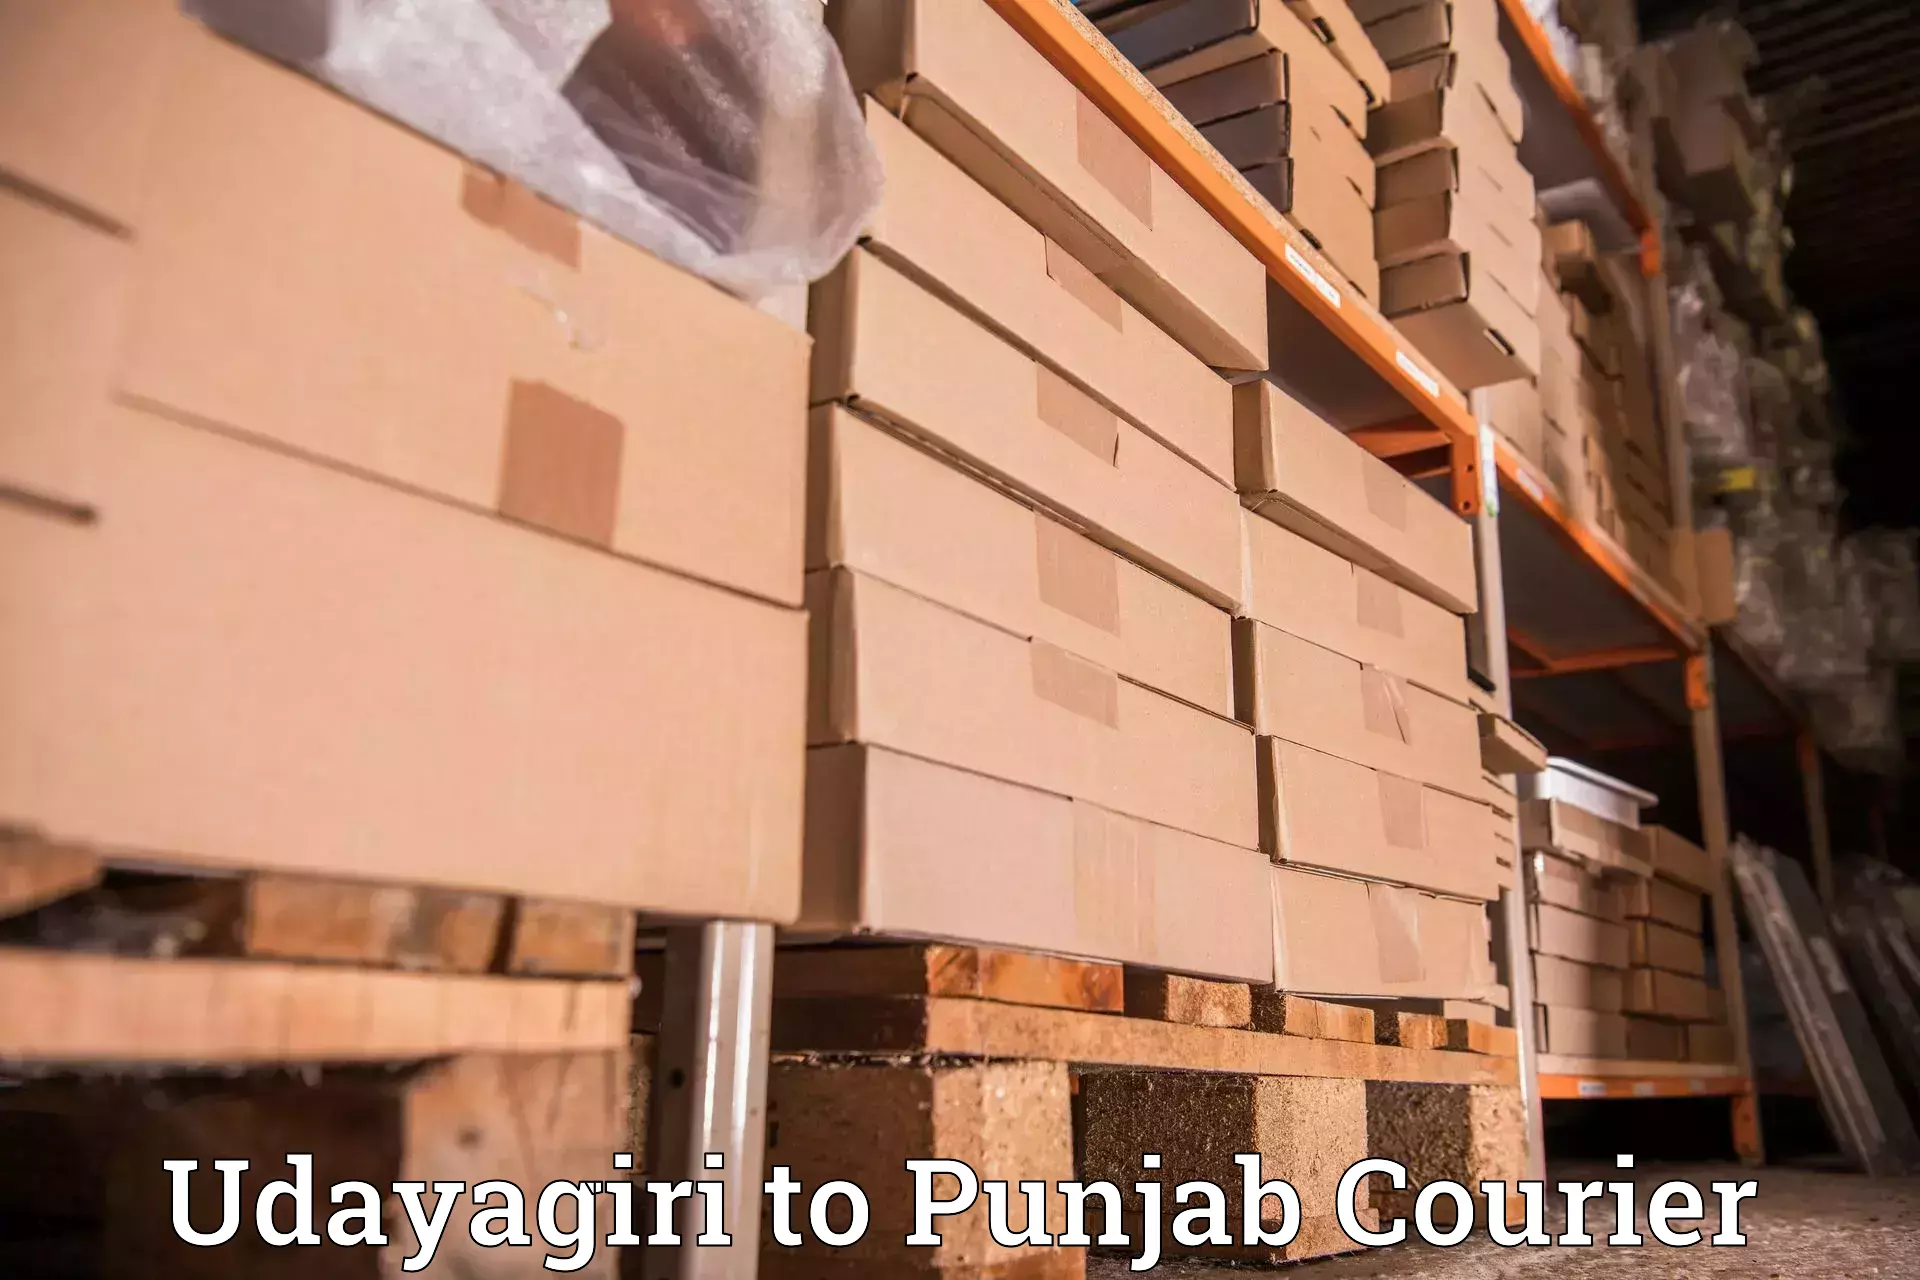 Parcel service for businesses Udayagiri to Bagha Purana